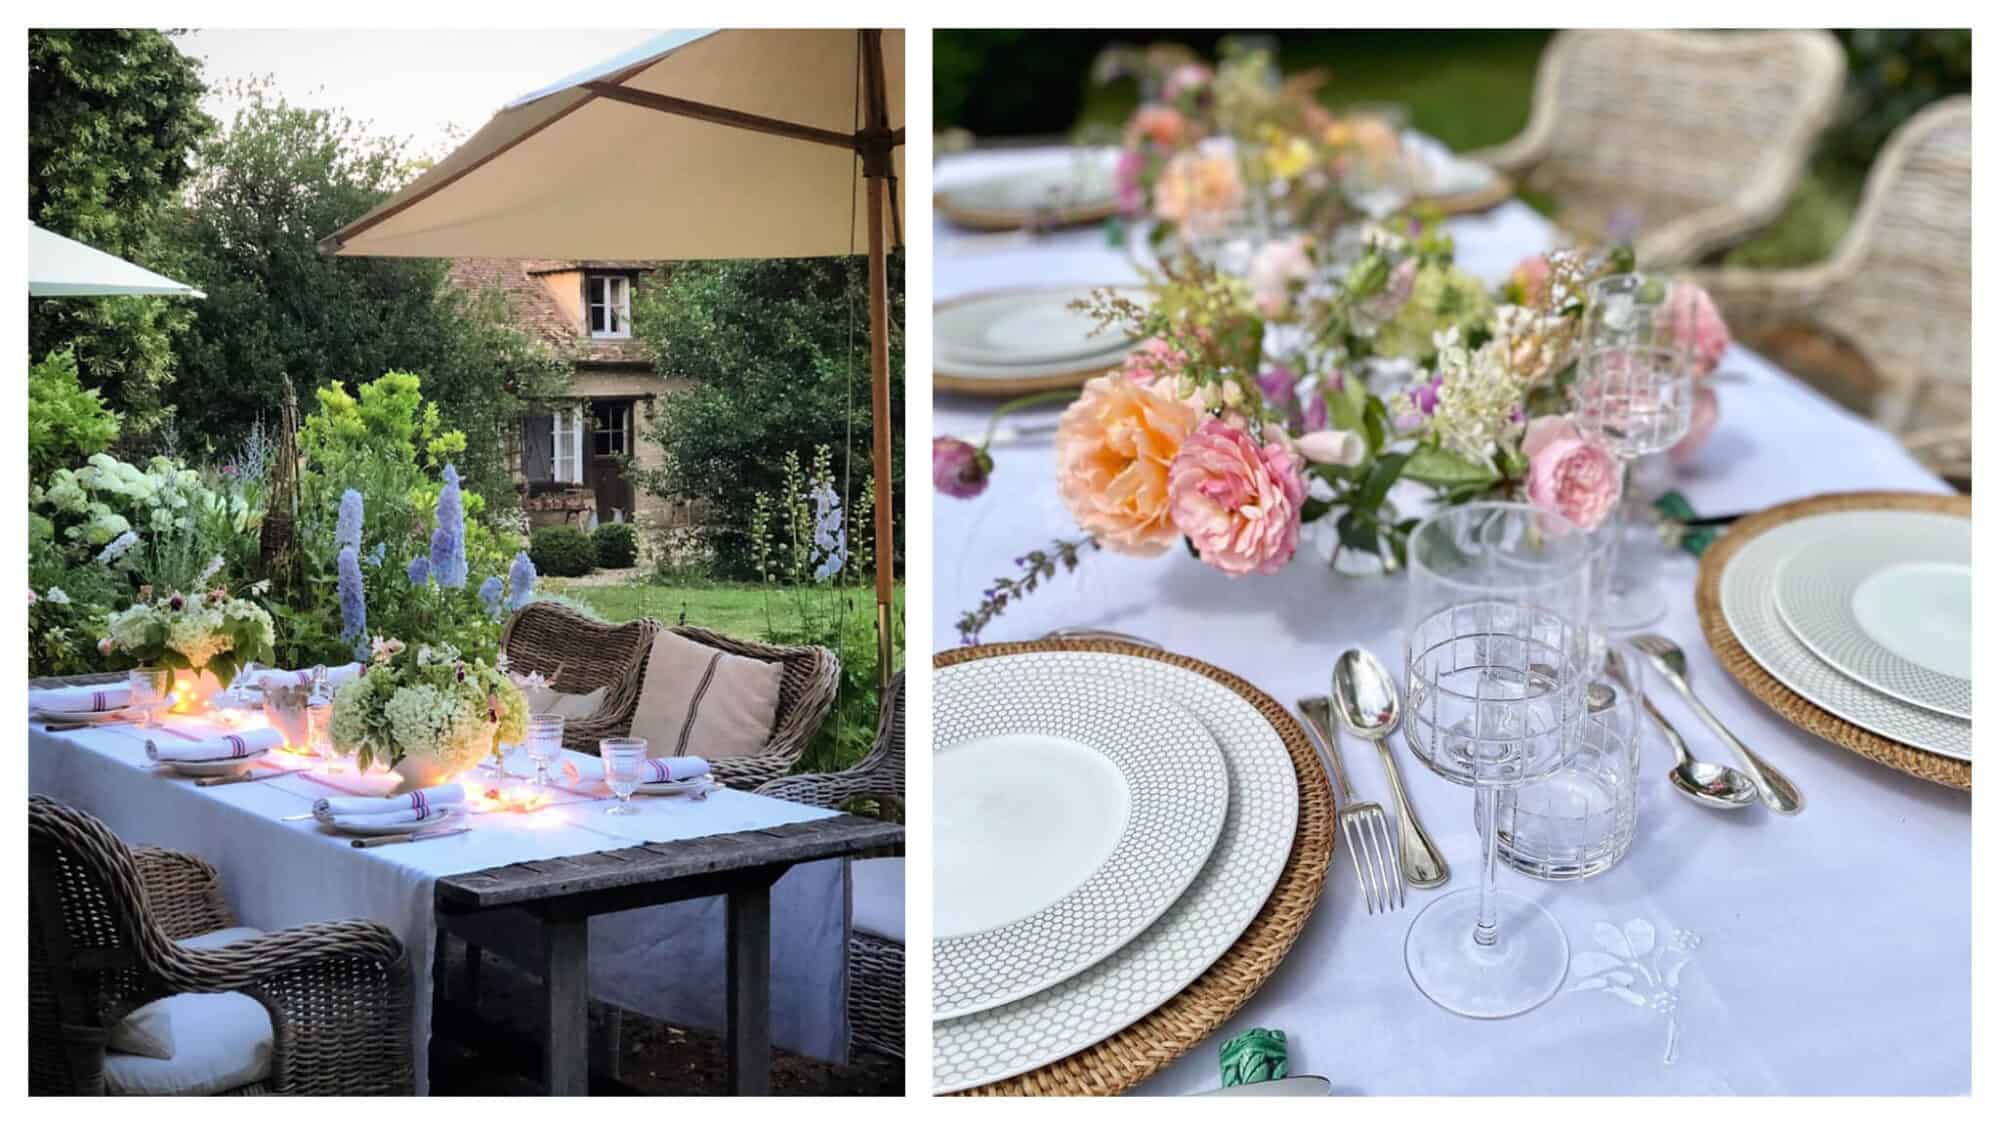 Left, a table set up for dinner in the garden in Normandy. Right, a beautifully laid table ready for dinner in a garden in Normandy.